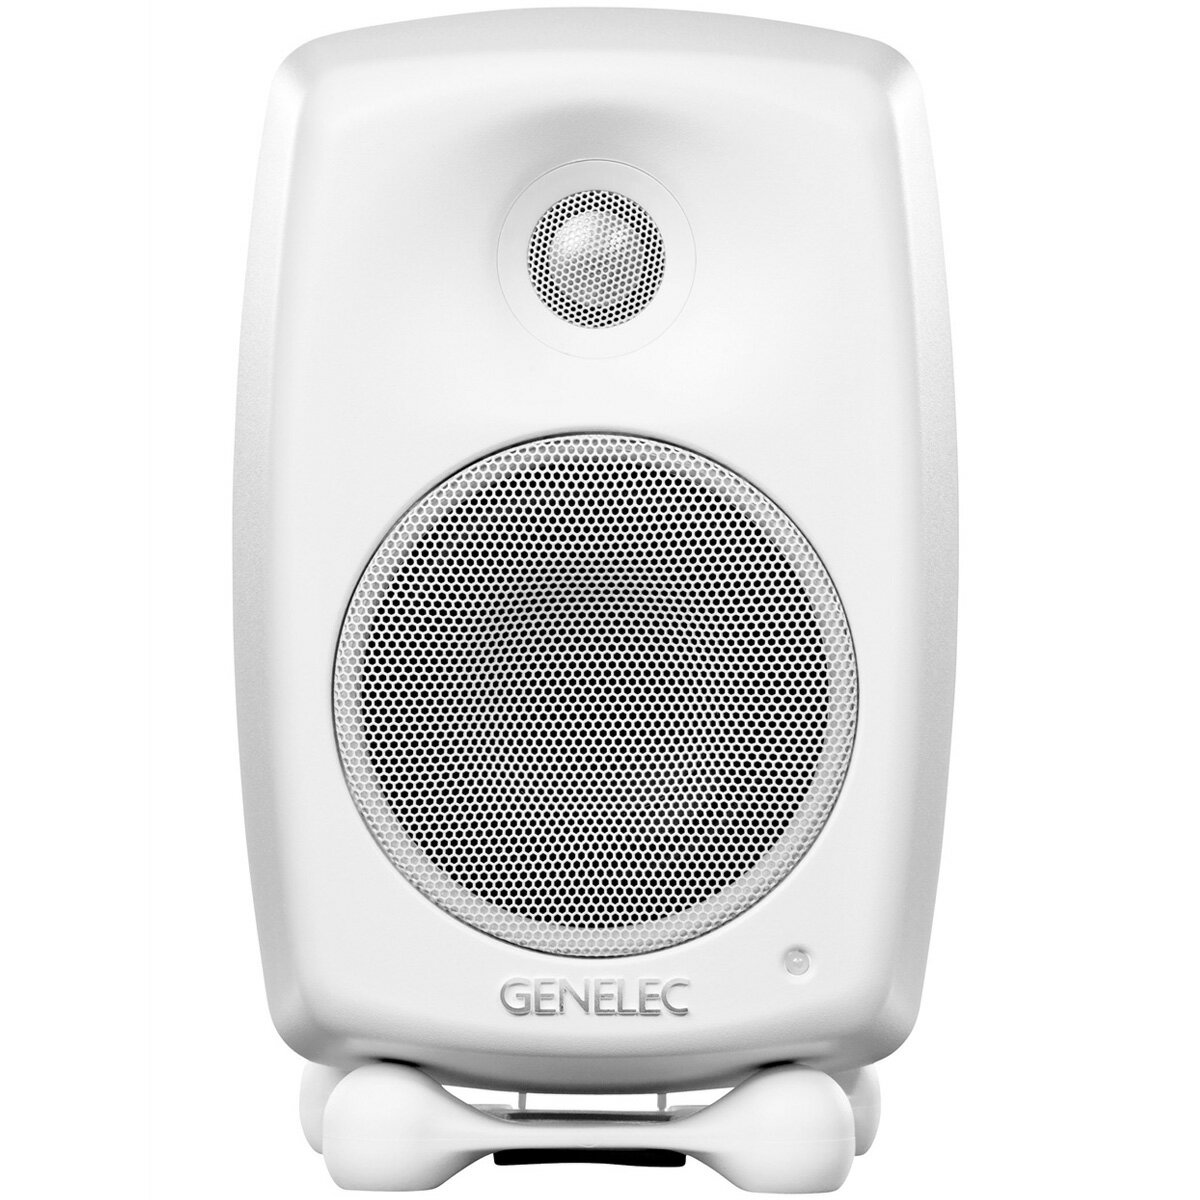 GENELEC ジェネレック / G Two ホワイト (1本) Home Audio Systems【お取り寄せ商品】